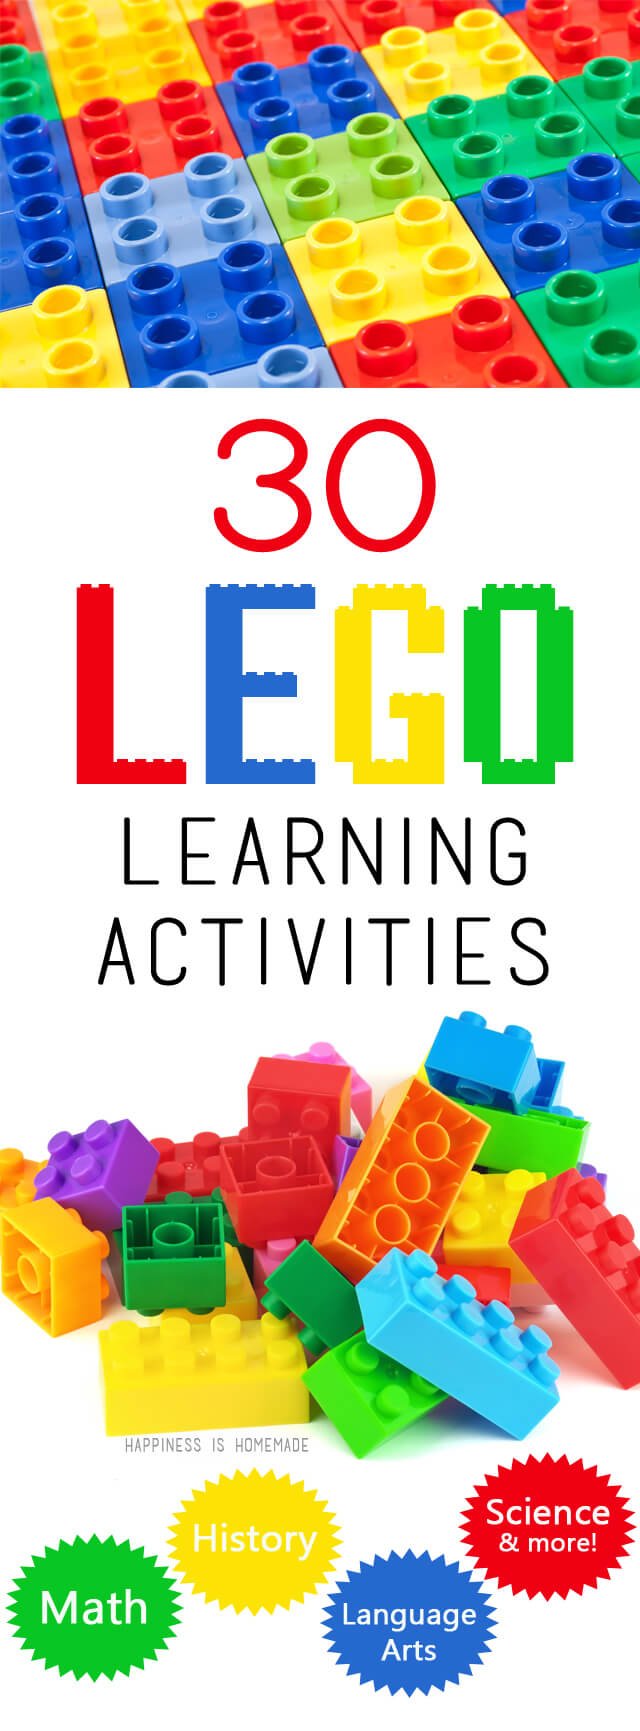 30 LEGO Learning Activities - Happiness is Homemade